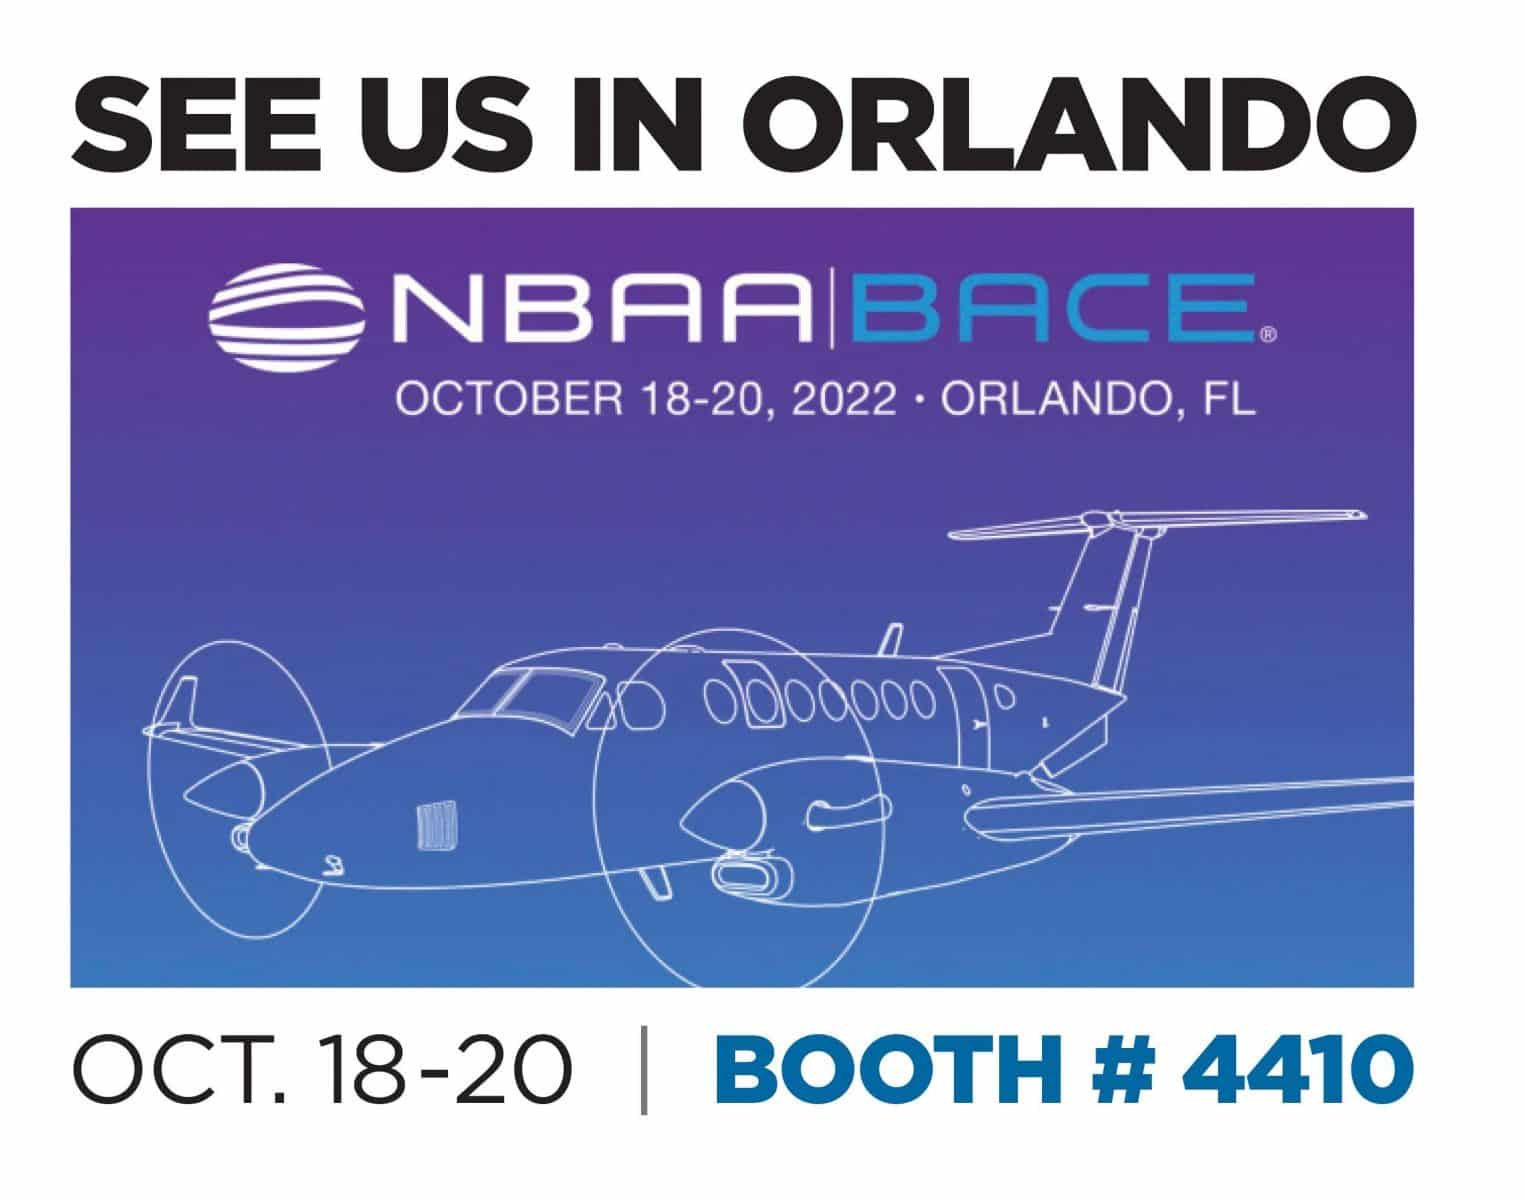 The NAASCO team is looking forward to seeing everyone at booth #4410 in Orlando at the 2022 NBAA Business Aviation Convention & Exhibition!